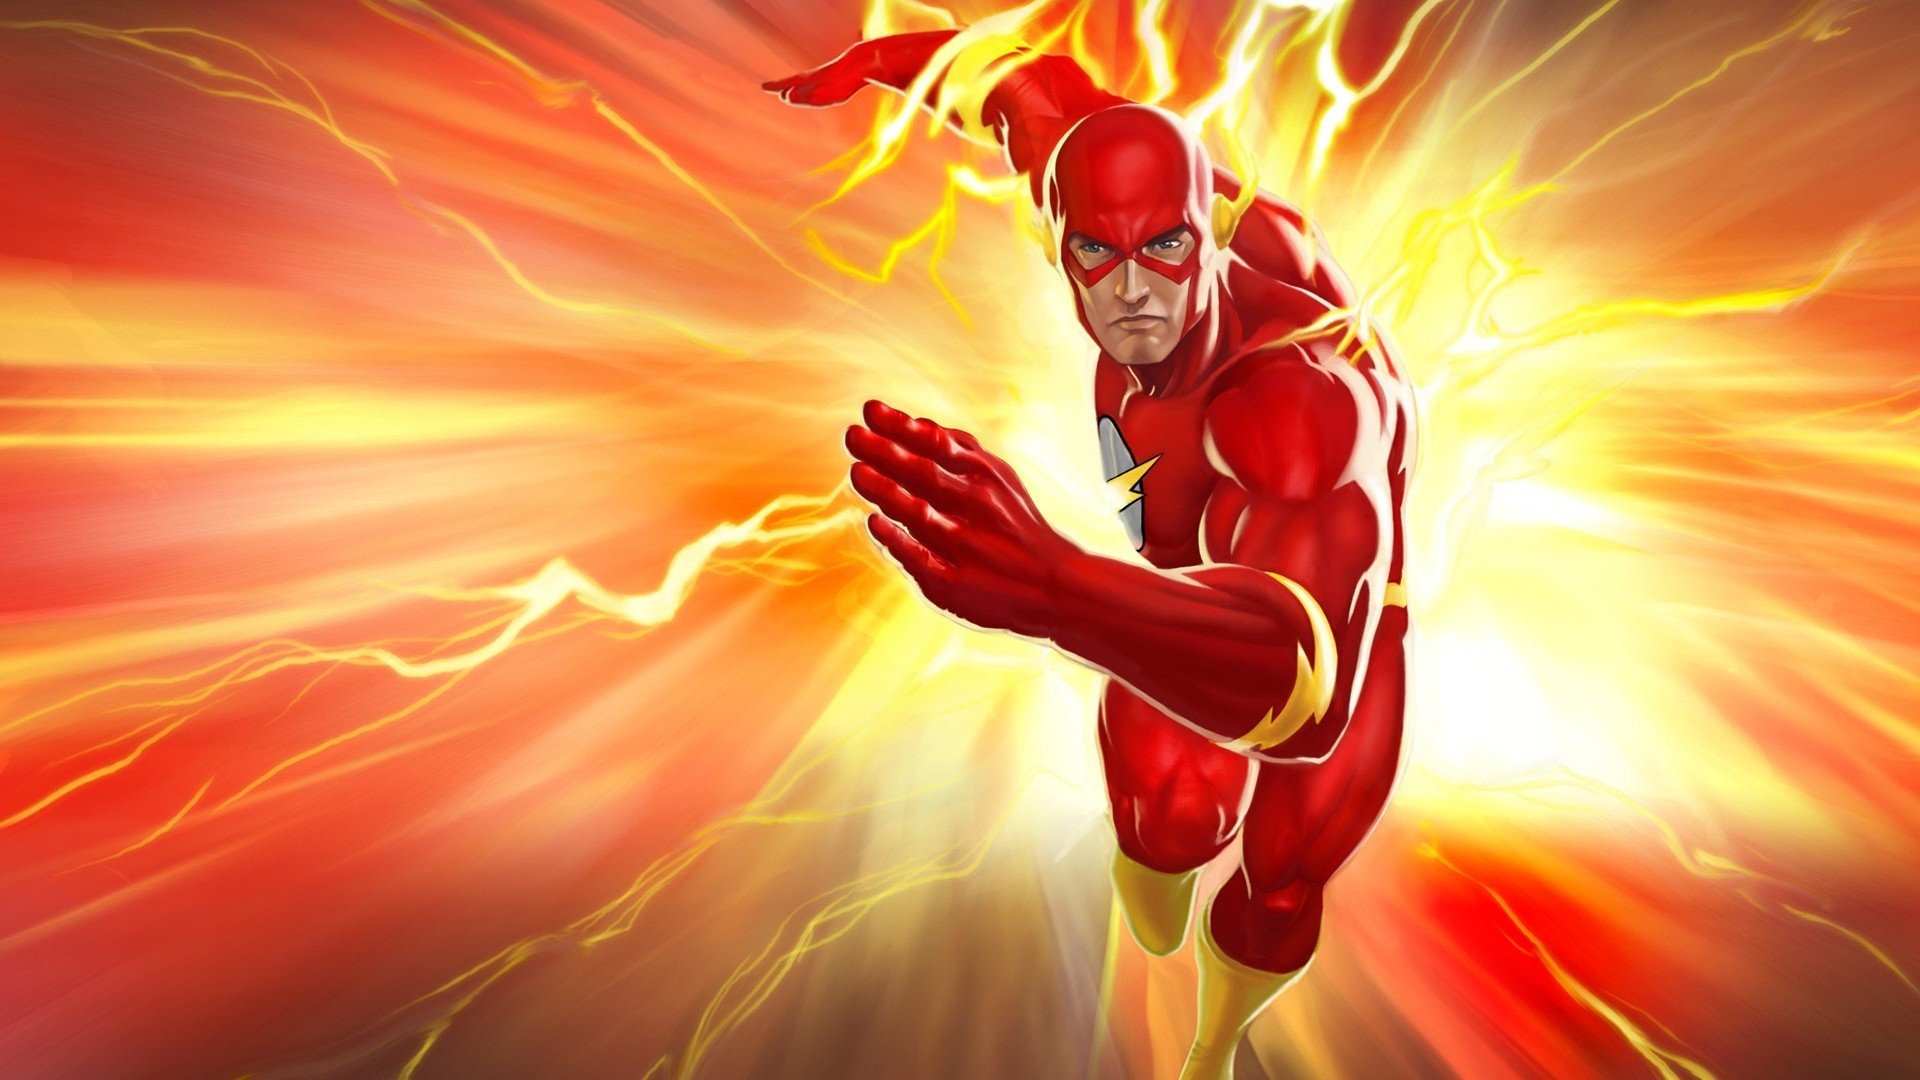 Download free the flash wallpapers for your mobile phone Zedge